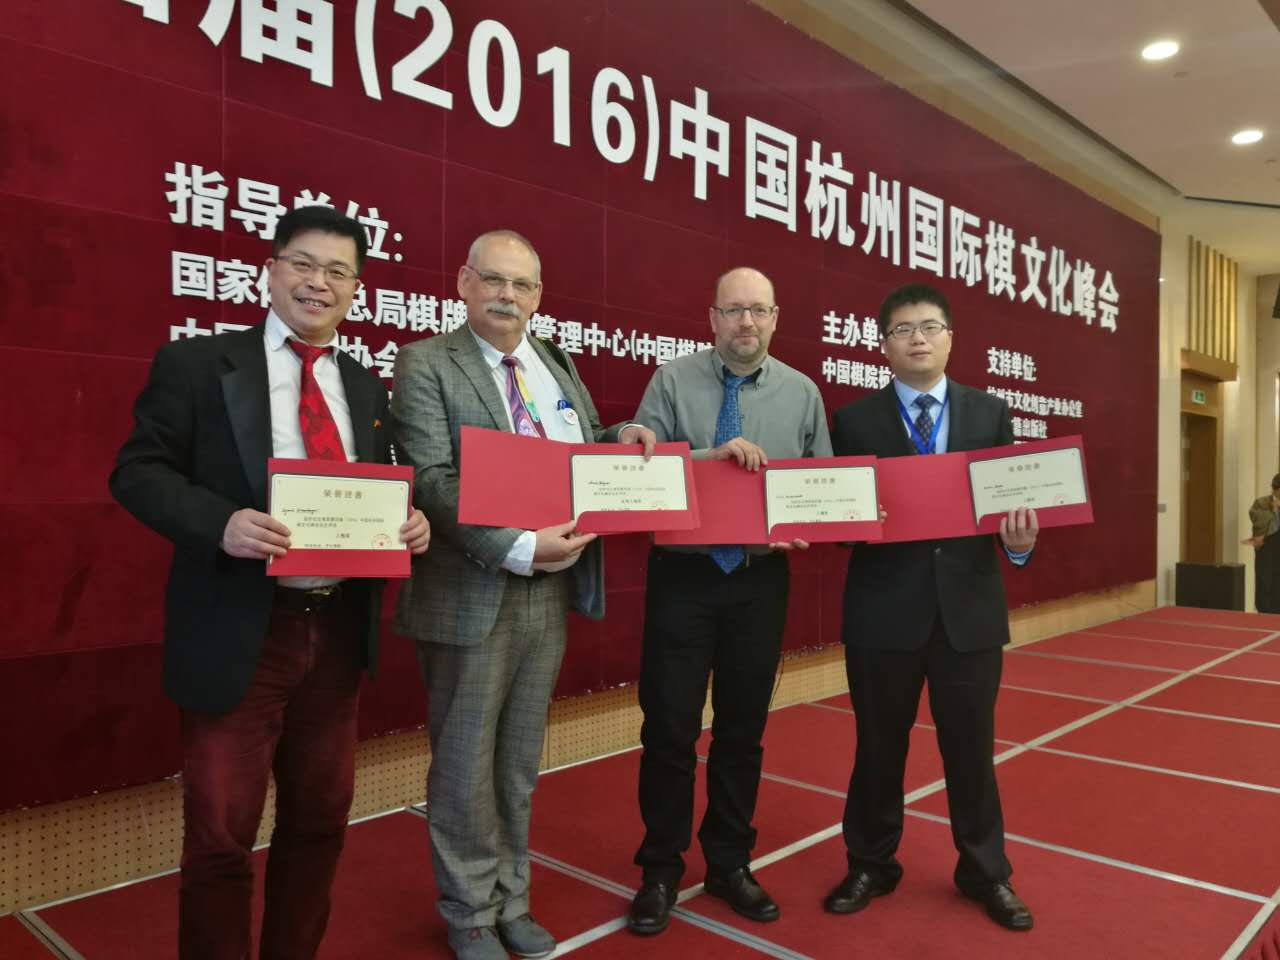 Another fruitful visit for the German delegation. Left to Right: Secretary General of the European Xiangqi Federation (EXF) Romeo Xue, Norbert Wagner, Martin Berger and Wang Ge.